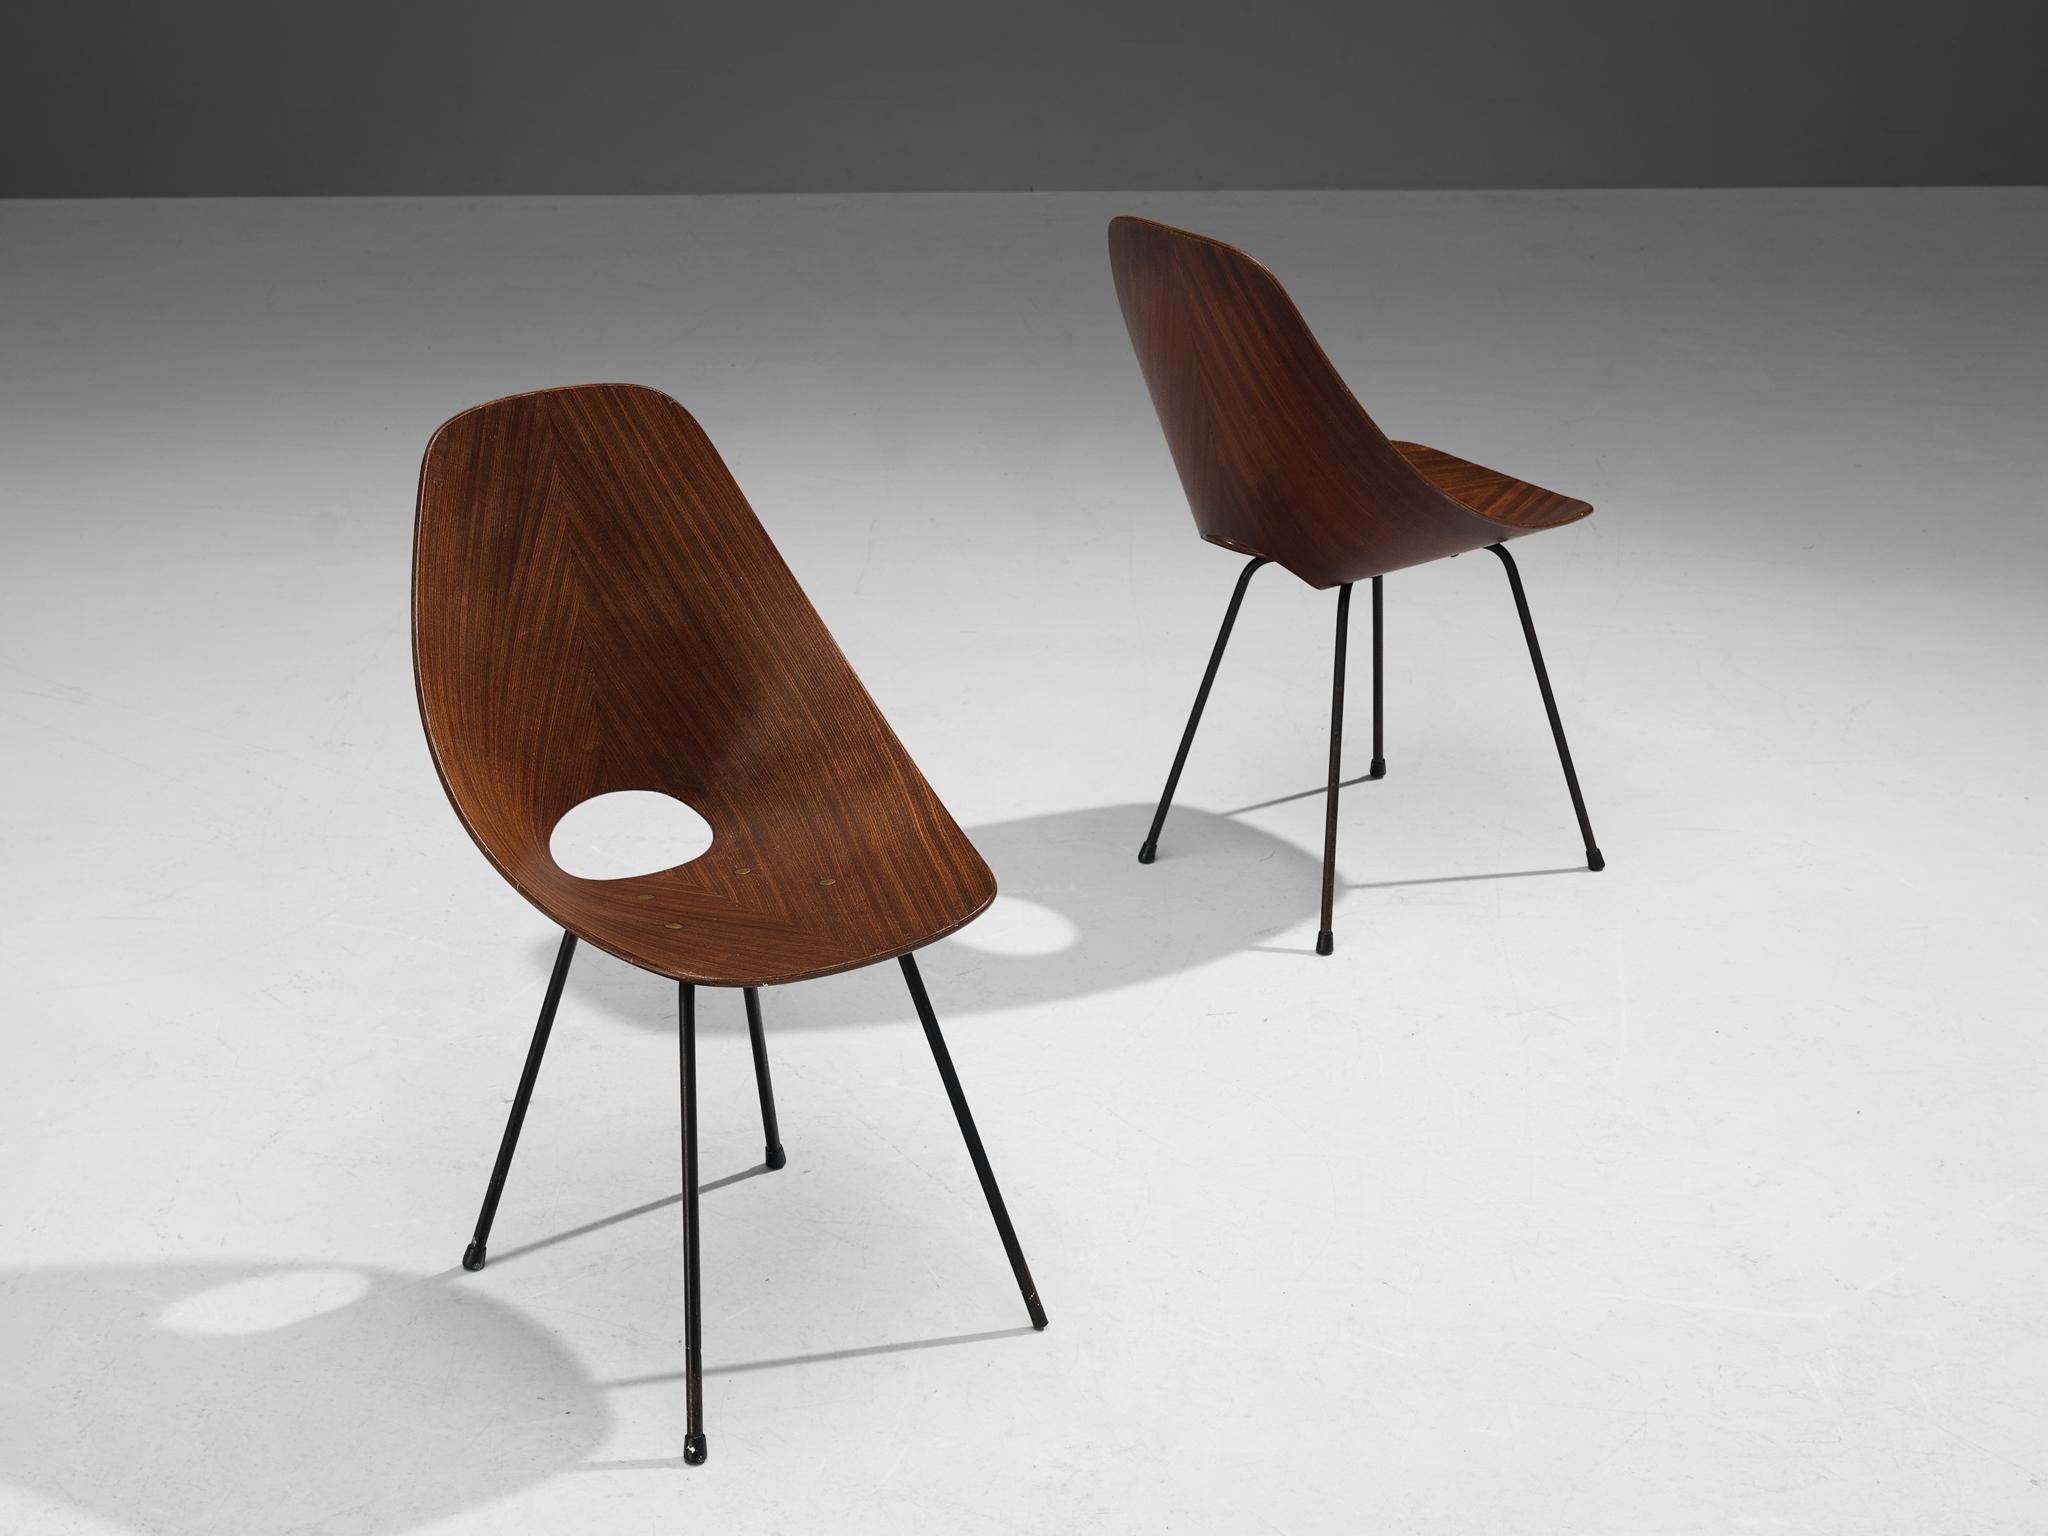 Vittorio Nobili for Tagliabue, dining chairs model 'Medea', mahogany, metal, brass, Italy, 1955.

This 'Medea' chair is designed by the Italian designer Vittorio Nobili. The plywood chairs are veneered in carefully chosen mahogany, which gives them